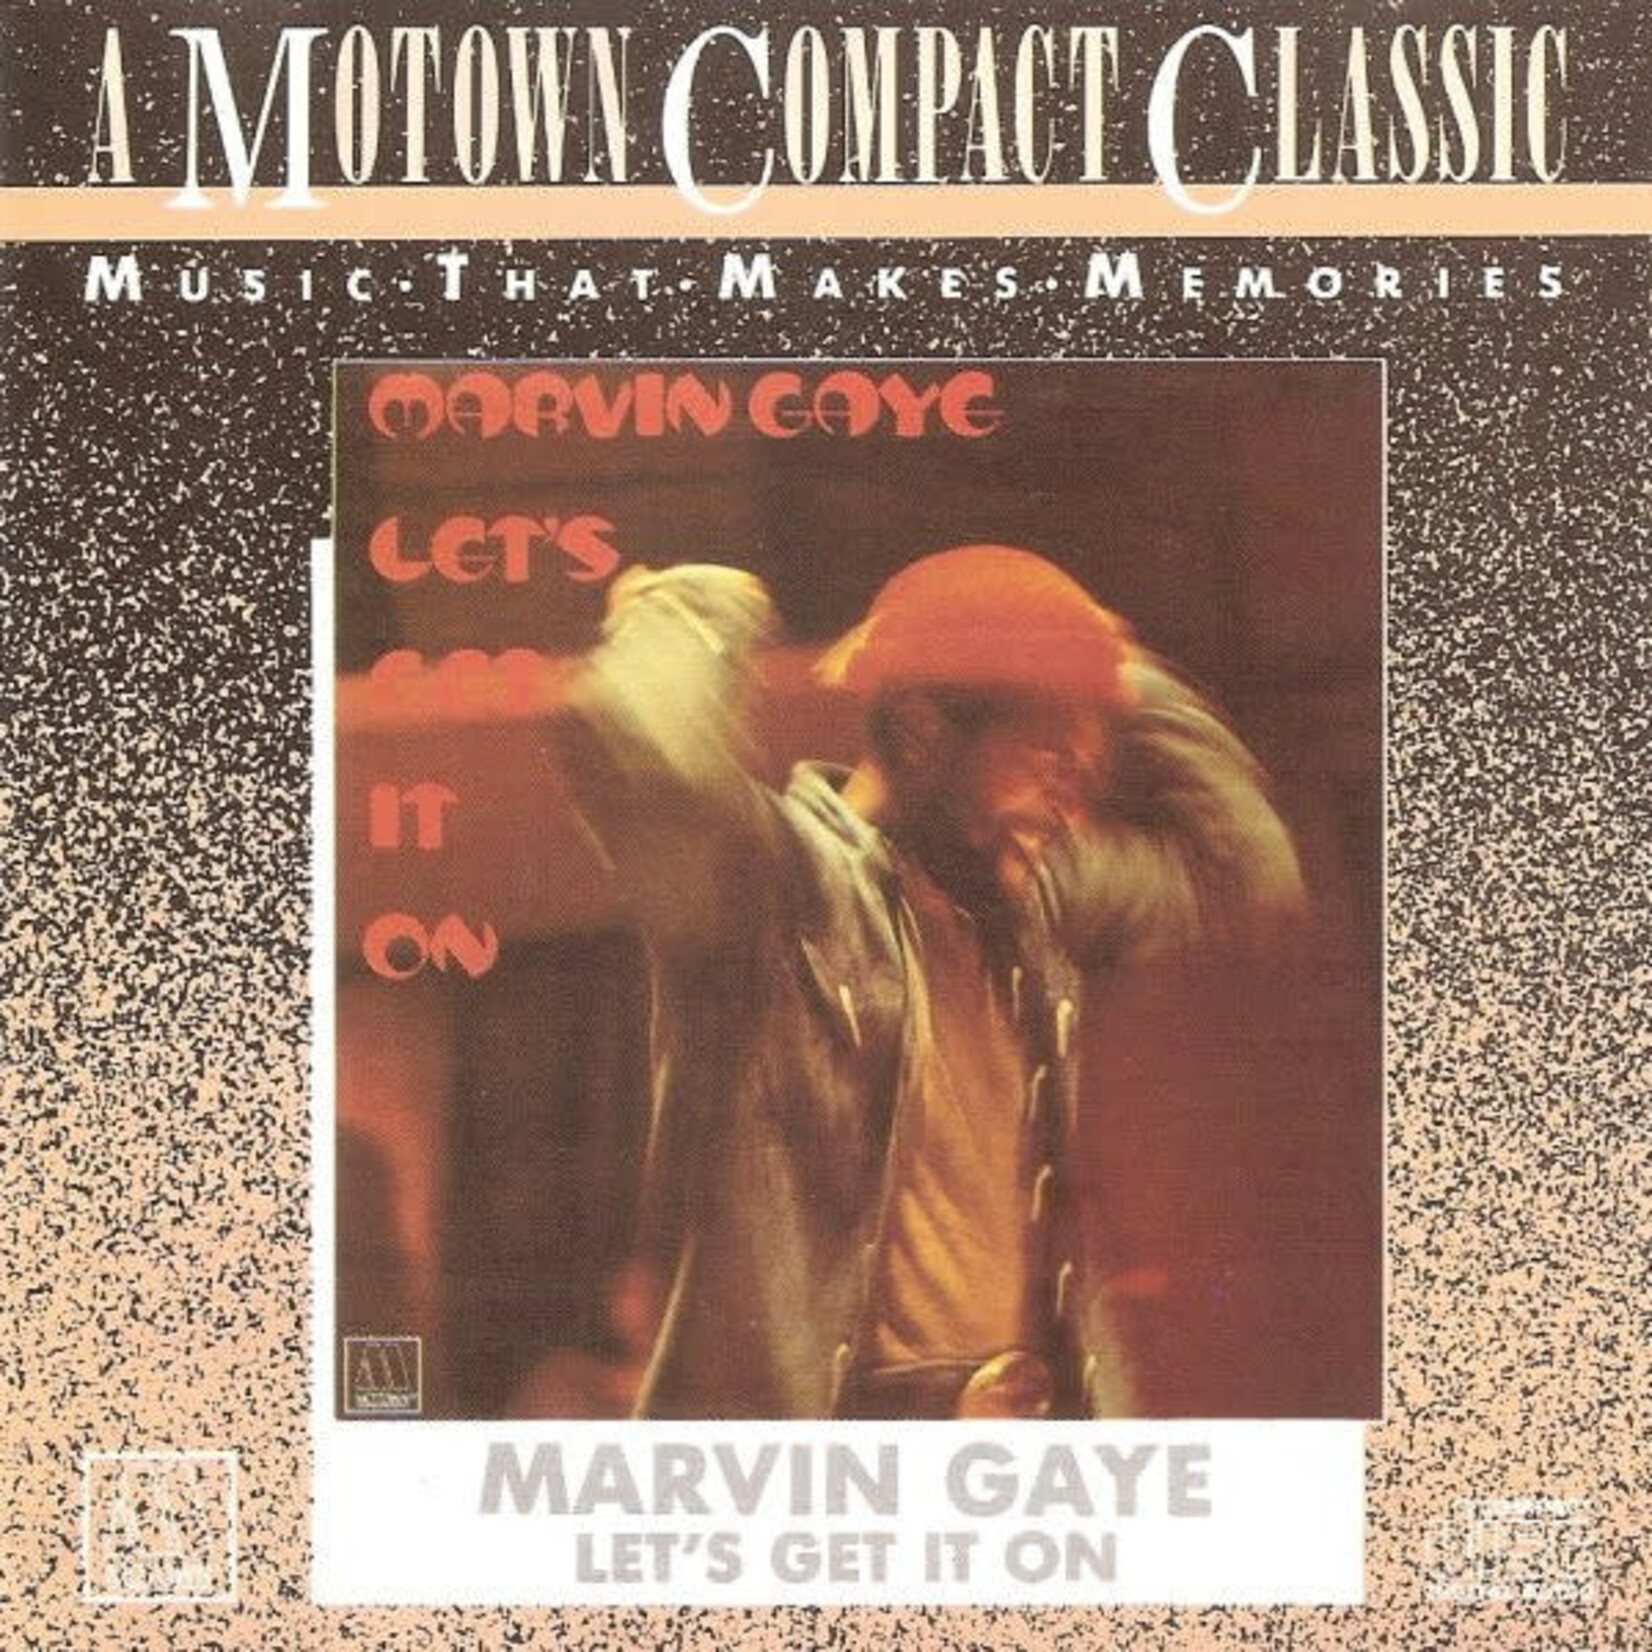 Marvin Gaye - Let's Get It On [USED CD]